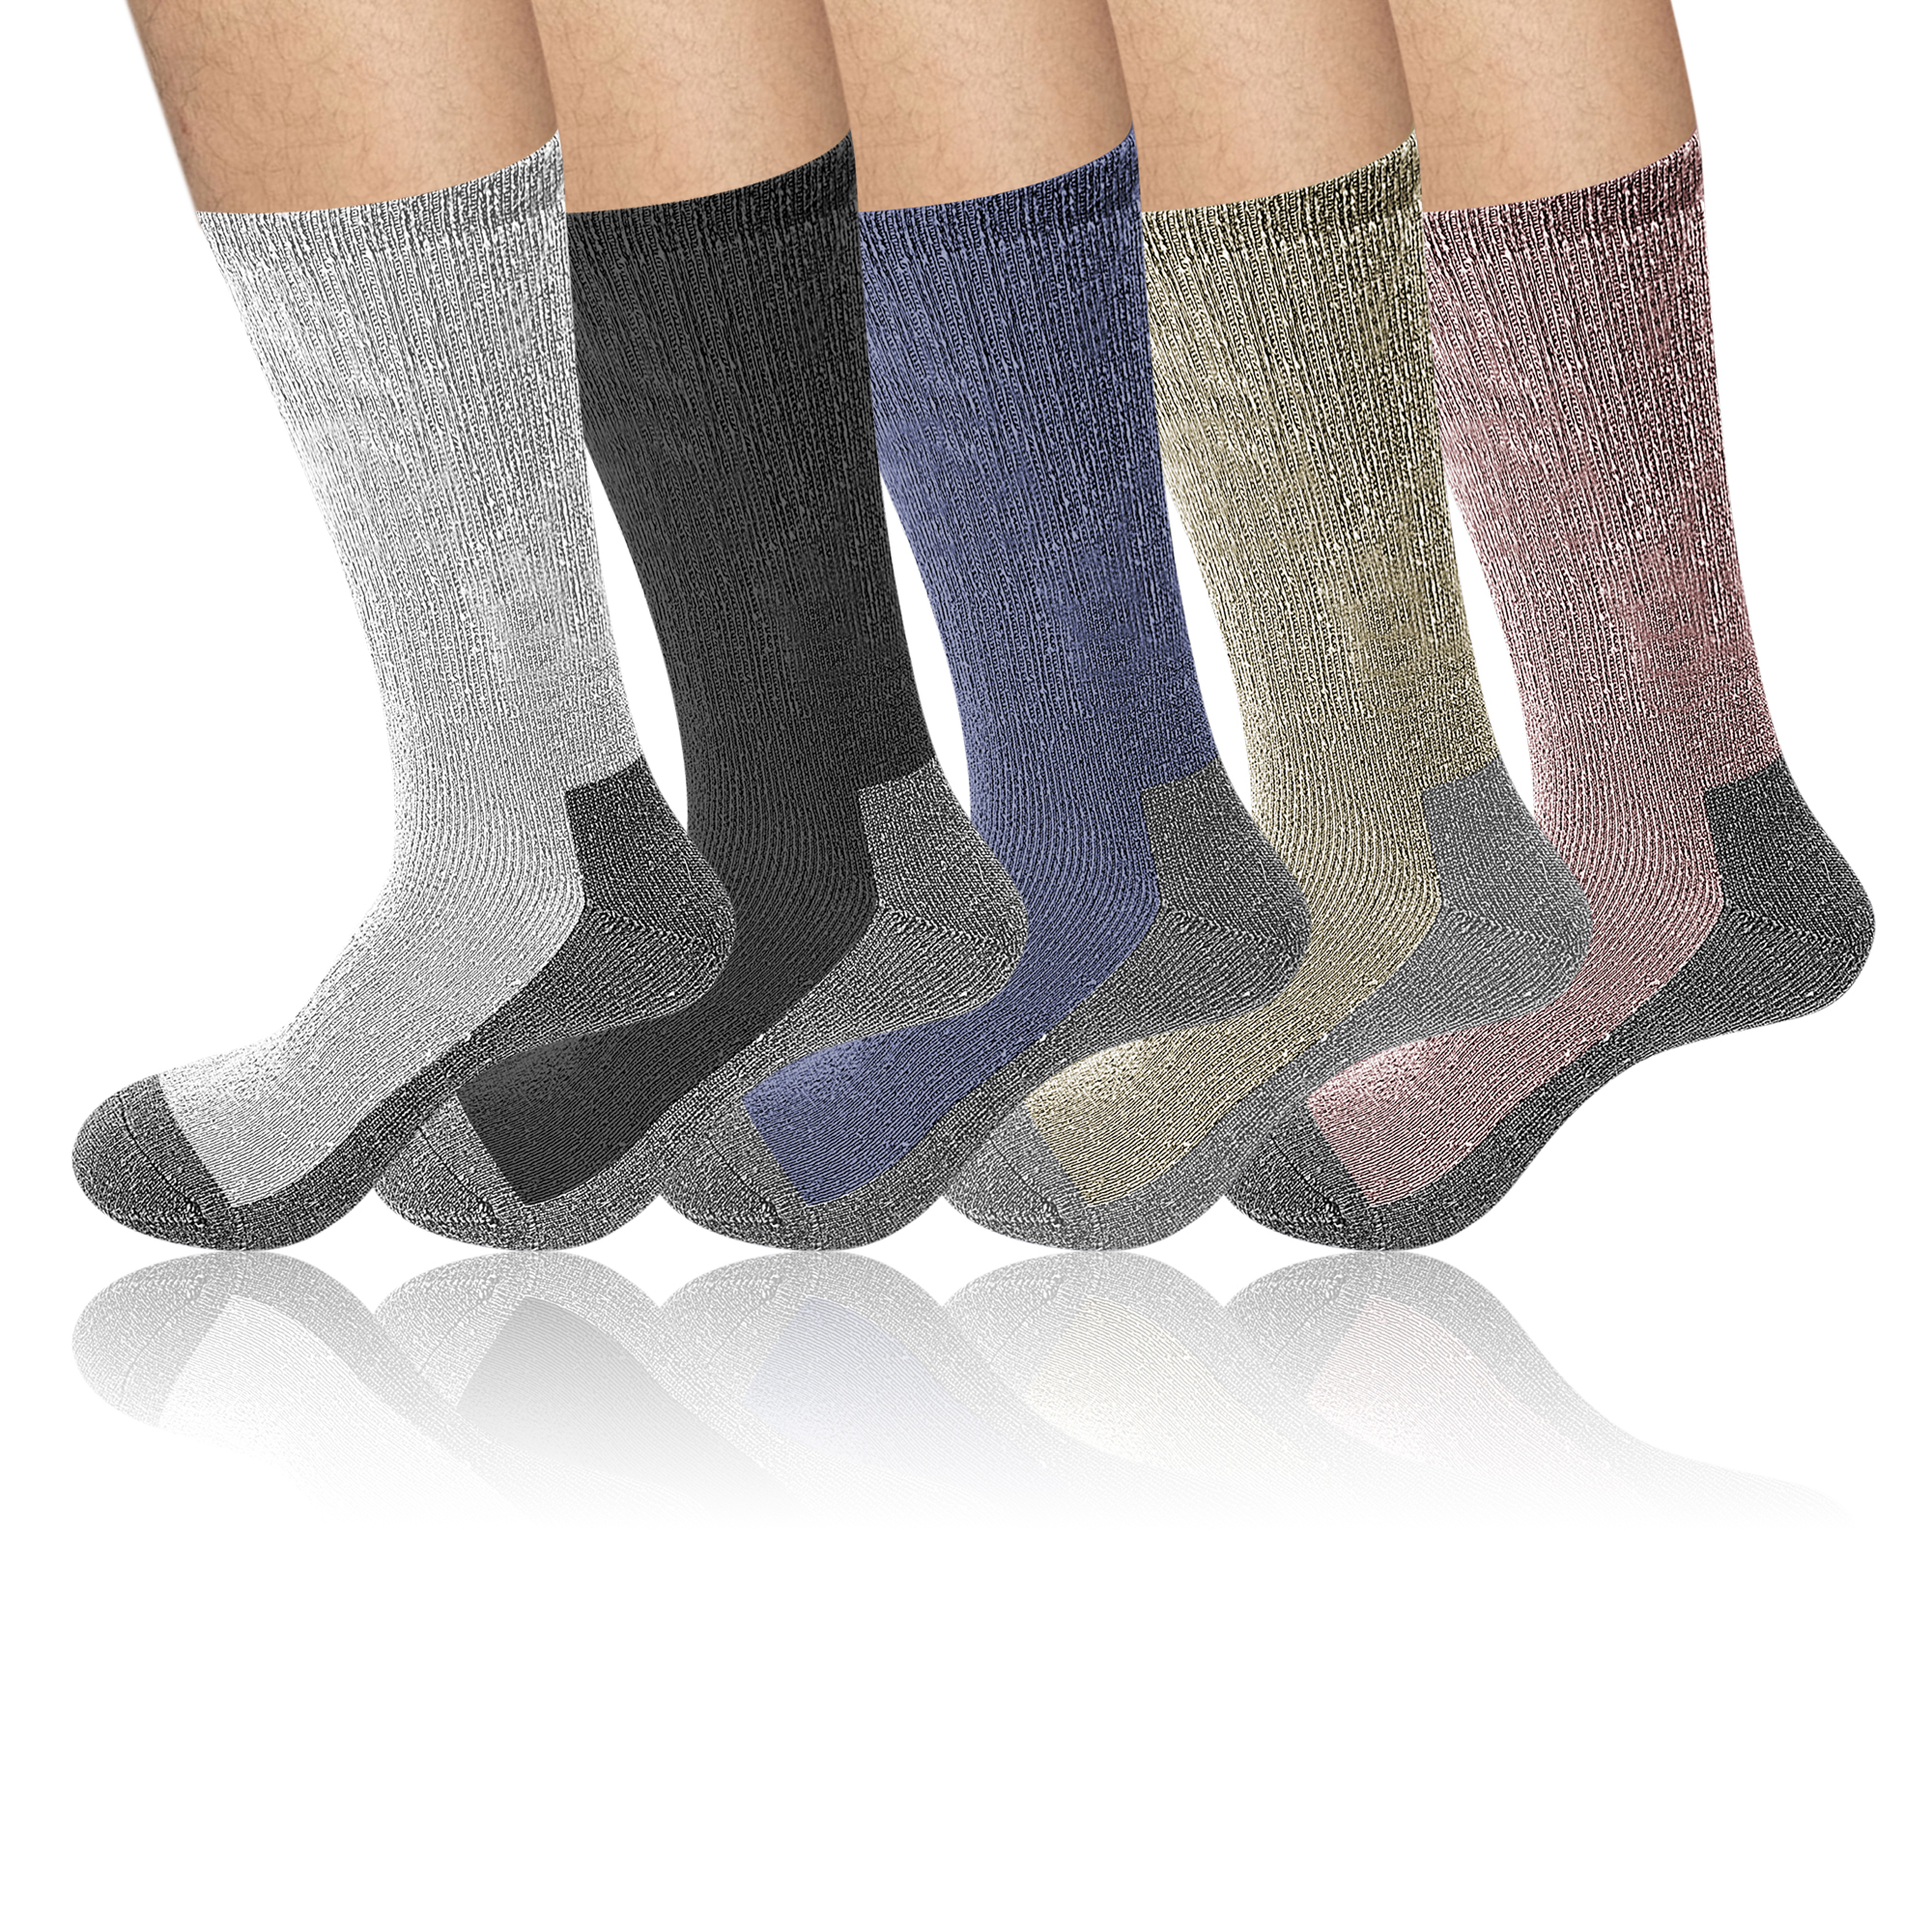 5-Pairs: Men's Warm Thick Merino Lamb Wool Socks For Winter Cold Weathers